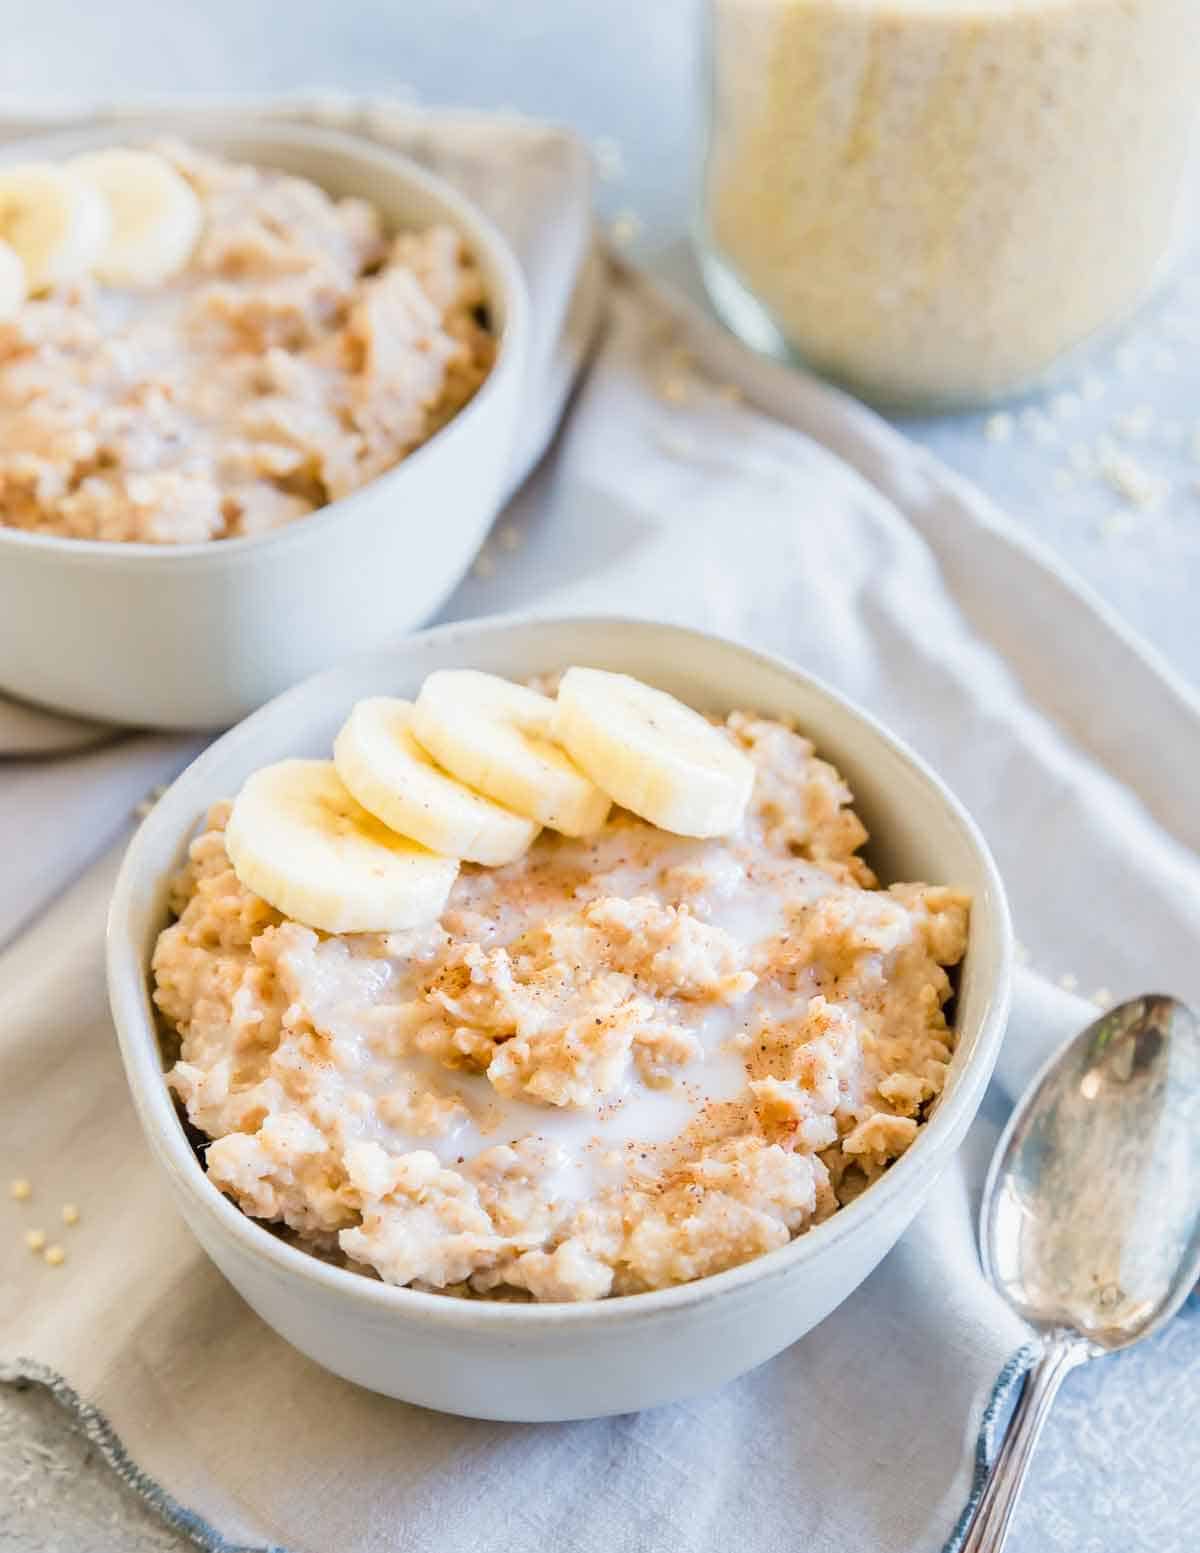 Millet porridge is a creamy, gluten-free breakfast easily made in the slow cooker overnight and ready when you wake up. With hints of cinnamon and vanilla it's the perfect base to top with your favorite fresh fruit, nuts and seeds for a hearty start to the day.